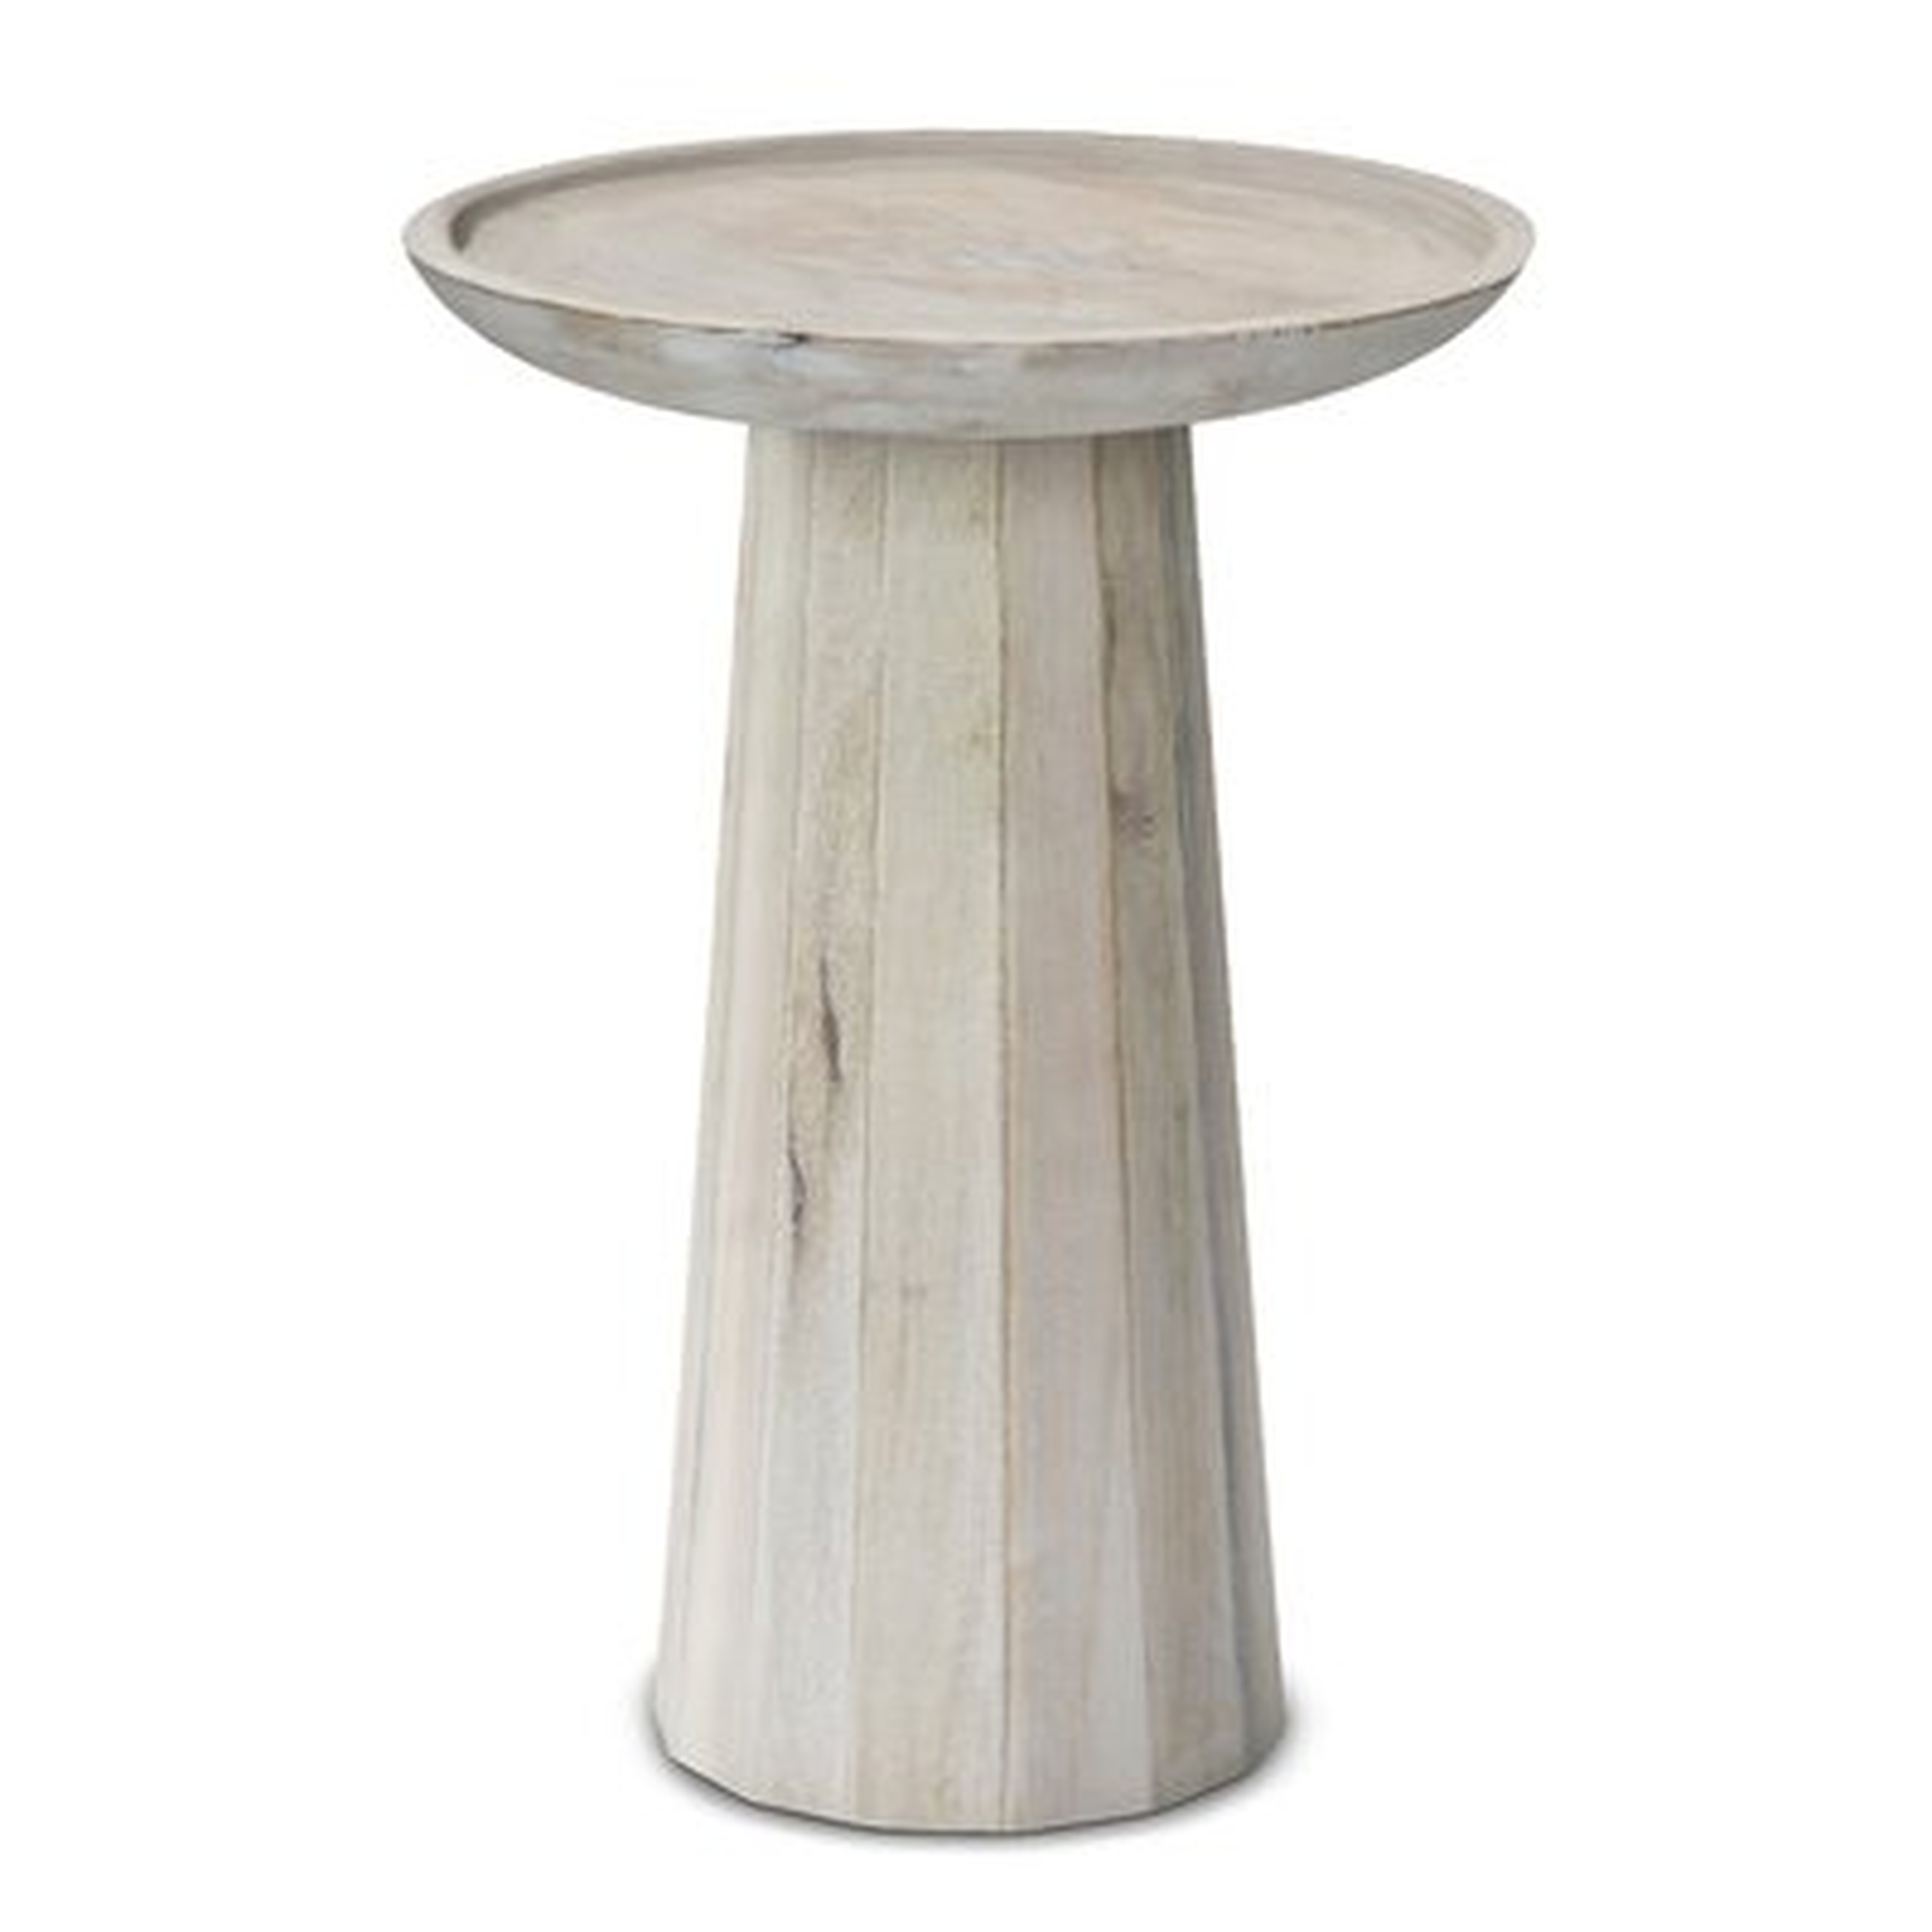 Dovercourt Solid Wood Tray Top Pedestal End Table, Whitewash - Wayfair